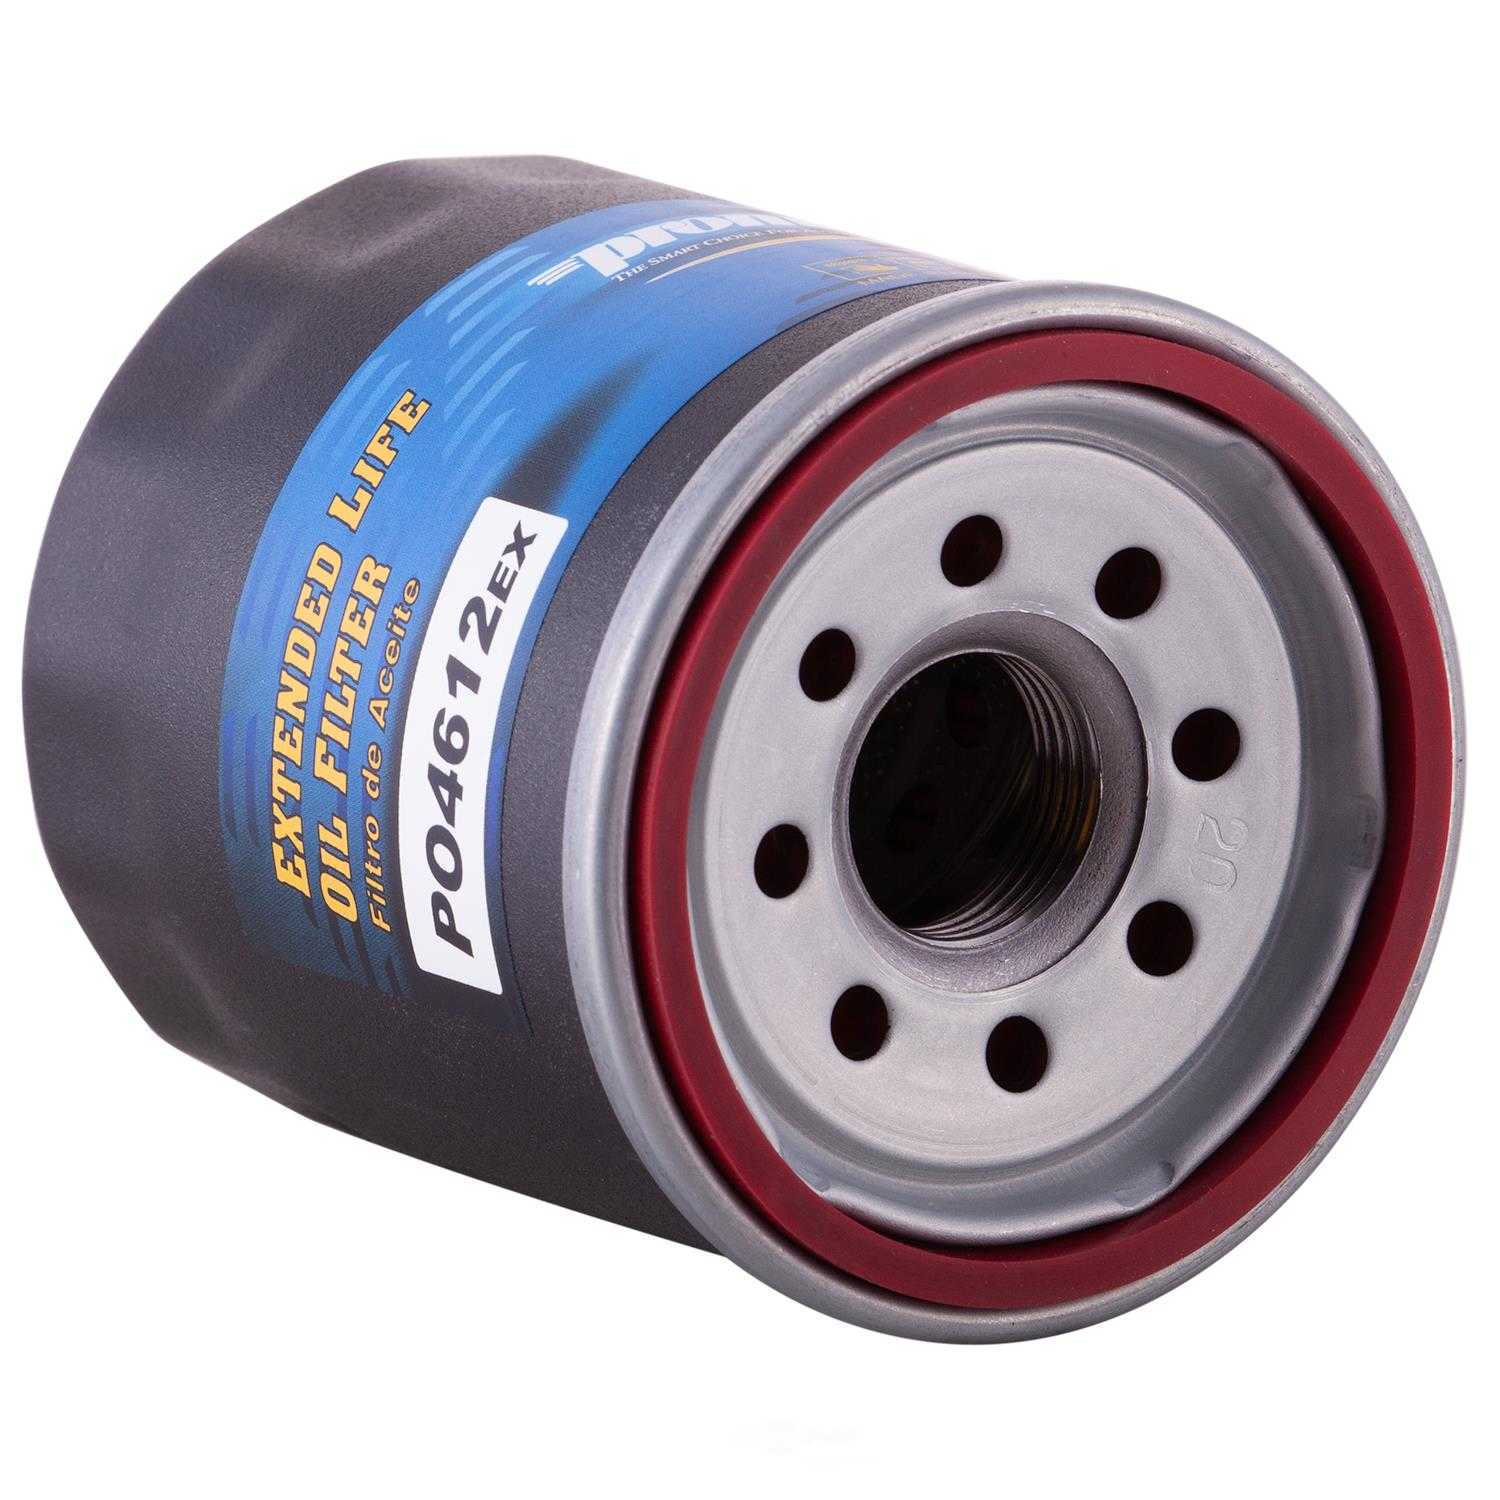 PRONTO/ID USA - Extended Life Oil Filter - PNP PO4612EX